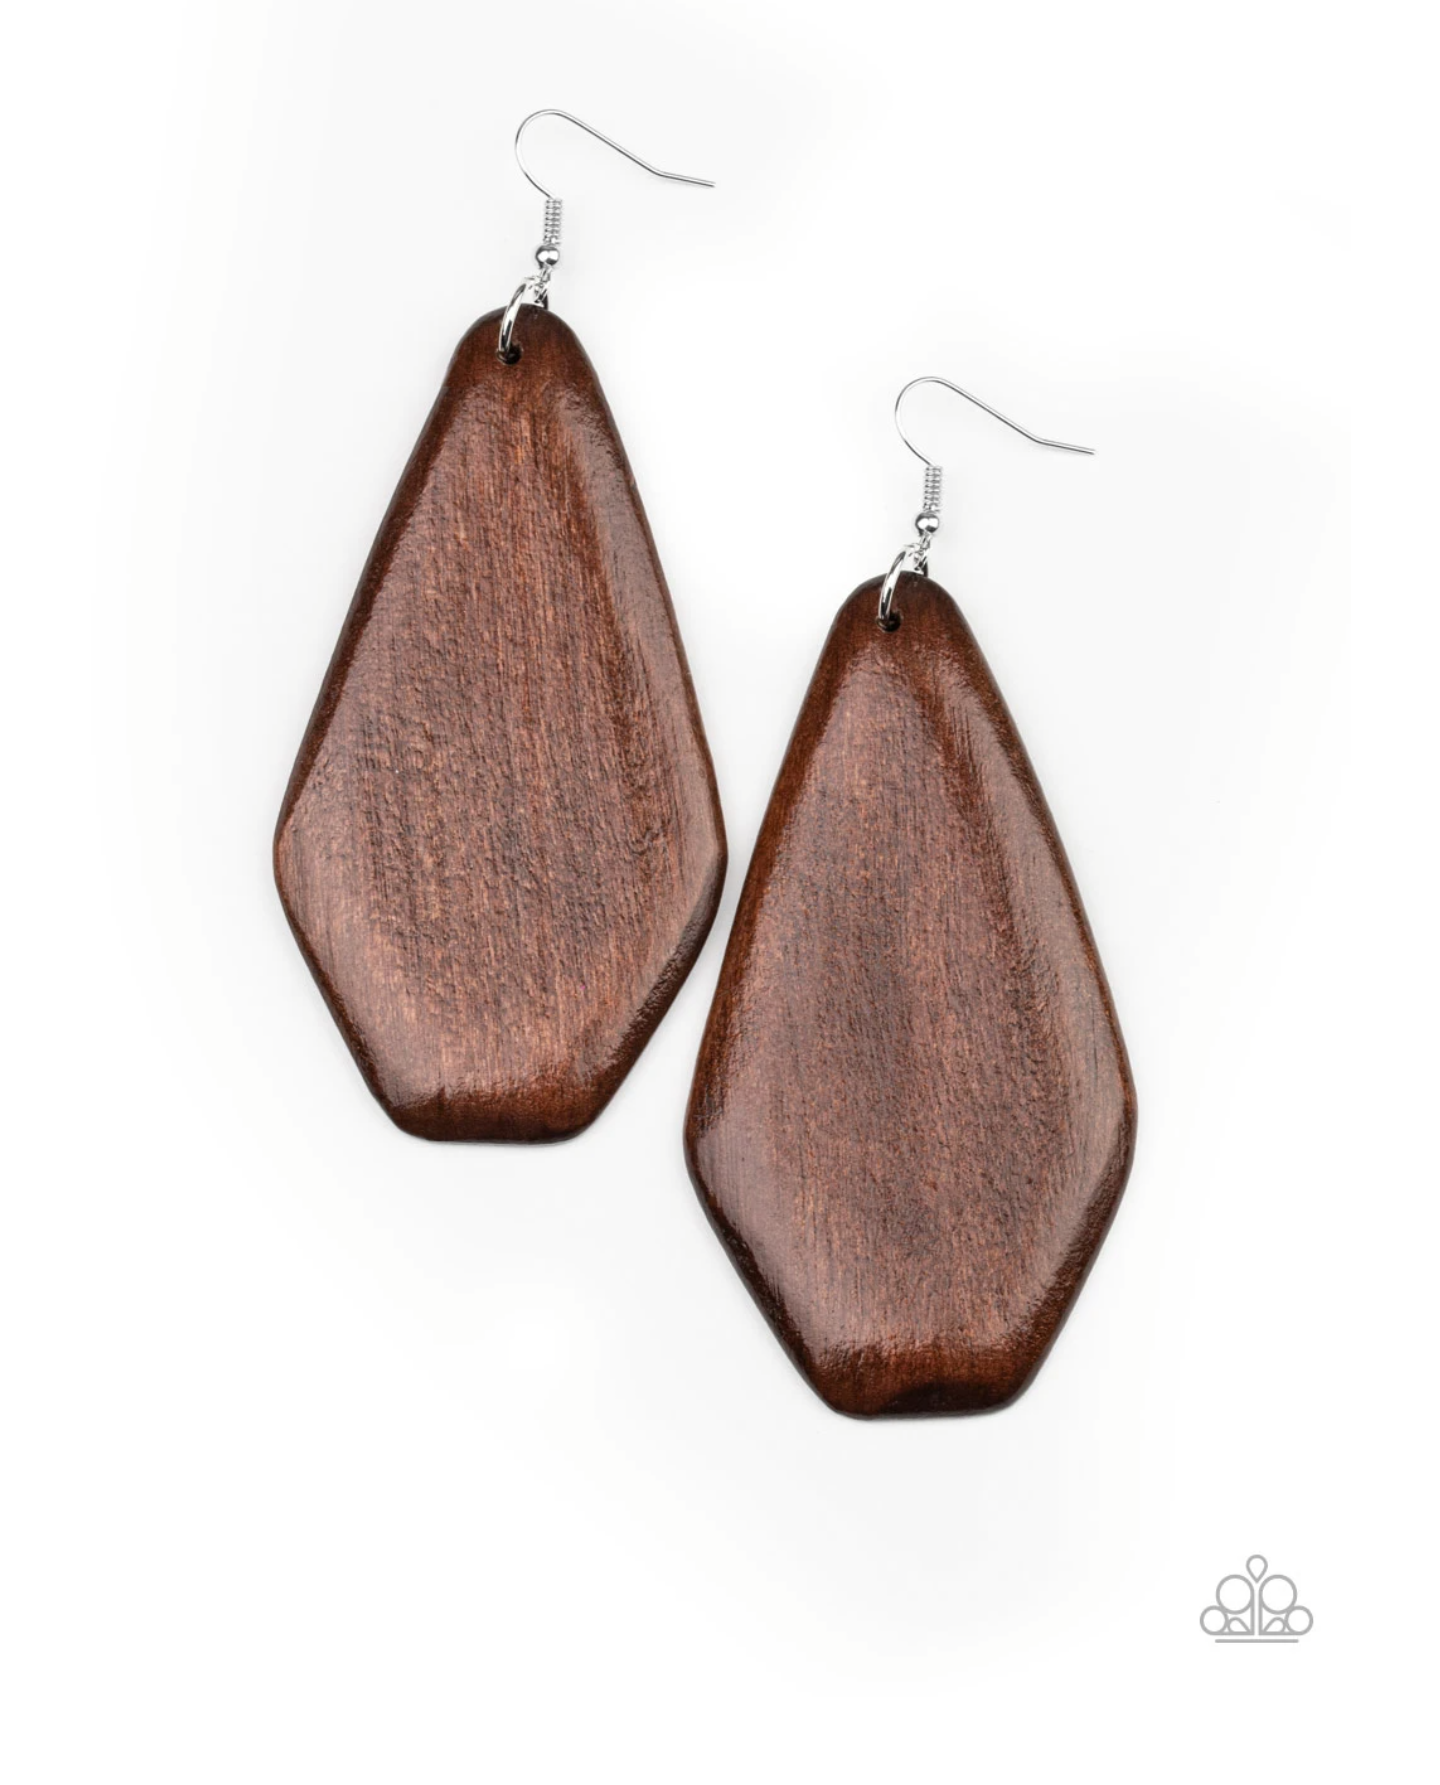 Vacation Ready - Brown Wood Earrings - VJ Bedazzled Jewelry